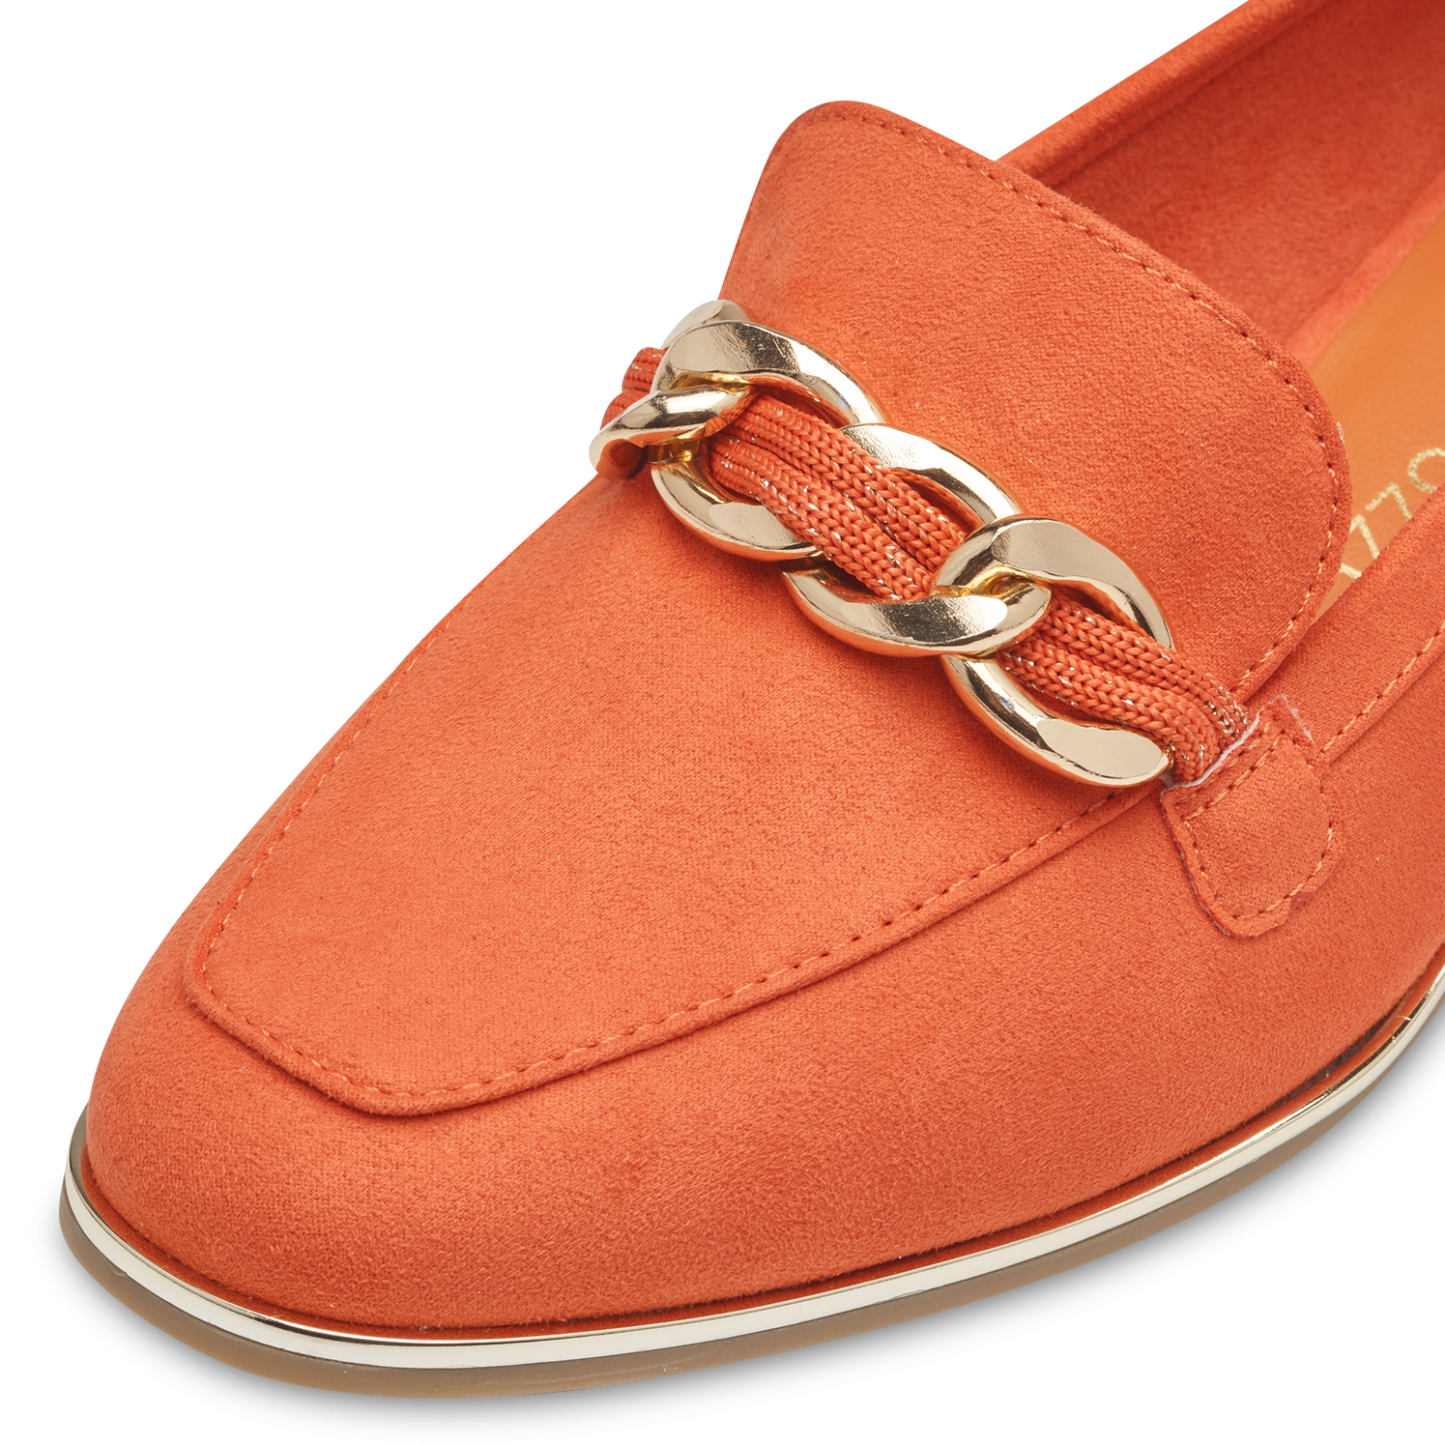 Marco Tozzi - Loafer with Gold Buckle - 24200